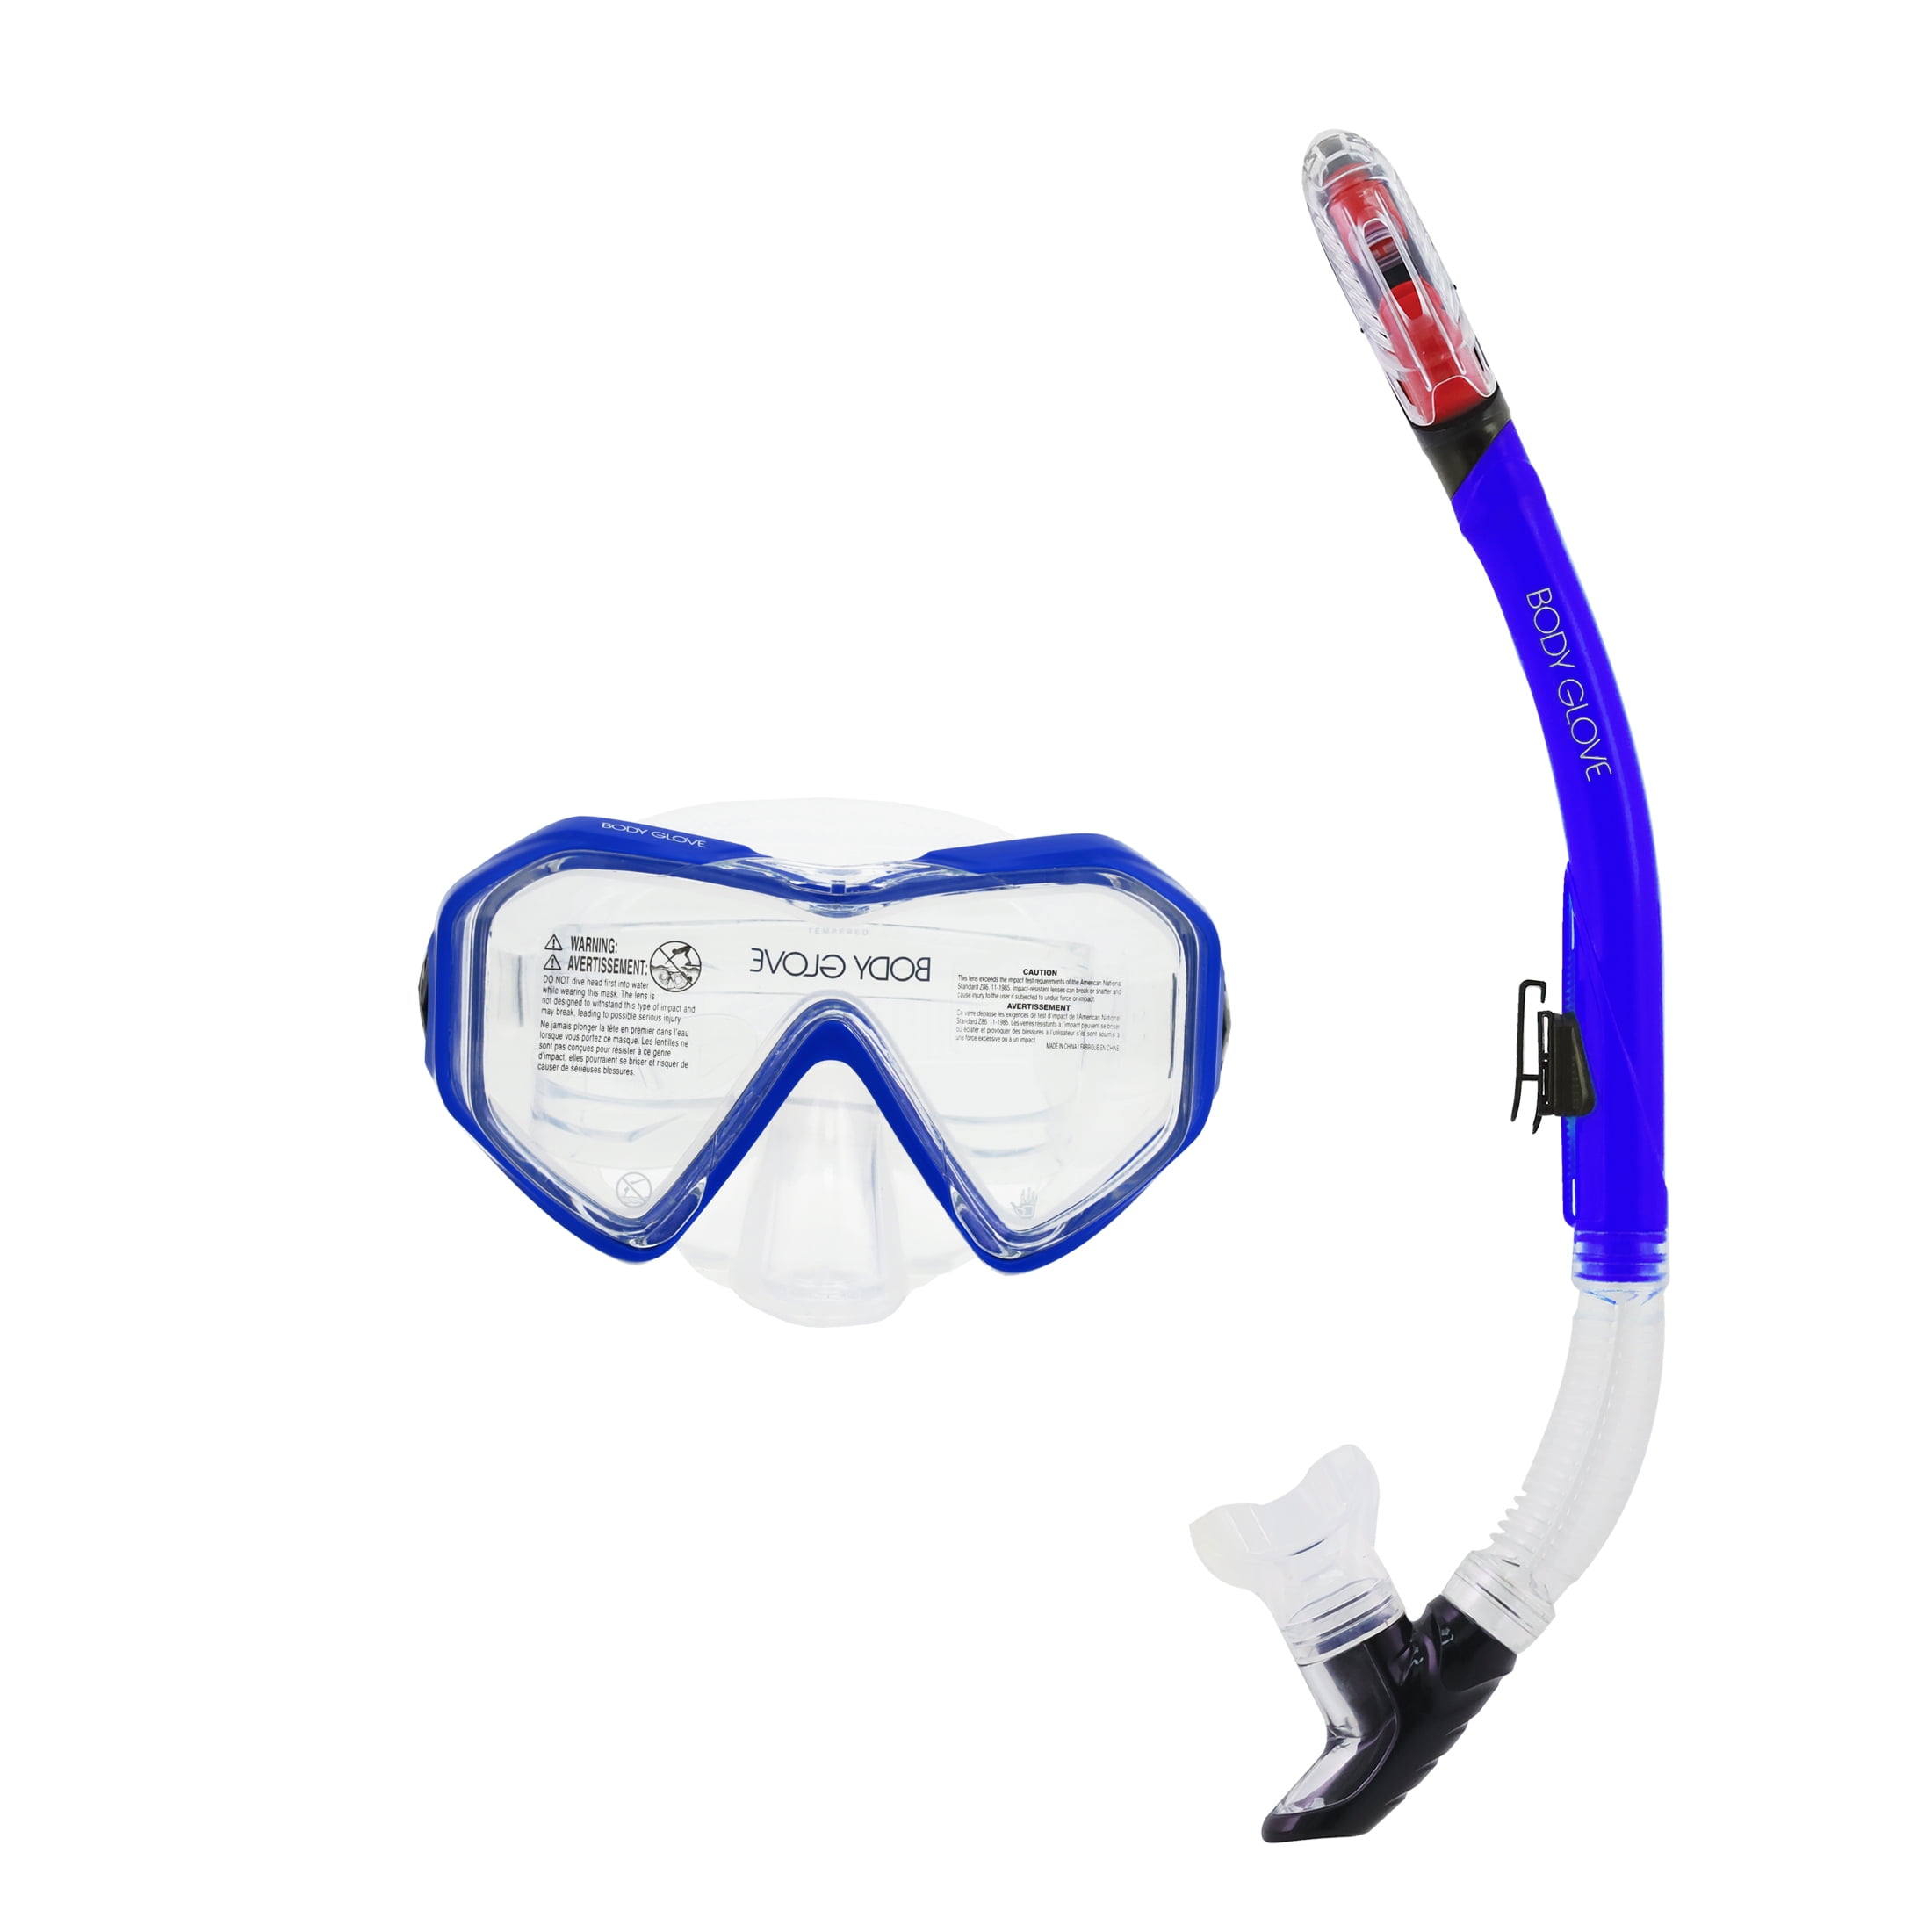 Body Glove Odyssey Adult Swimming Diving Mask/Snorkel Combo, GoPro Mount on Snorkel, Blue